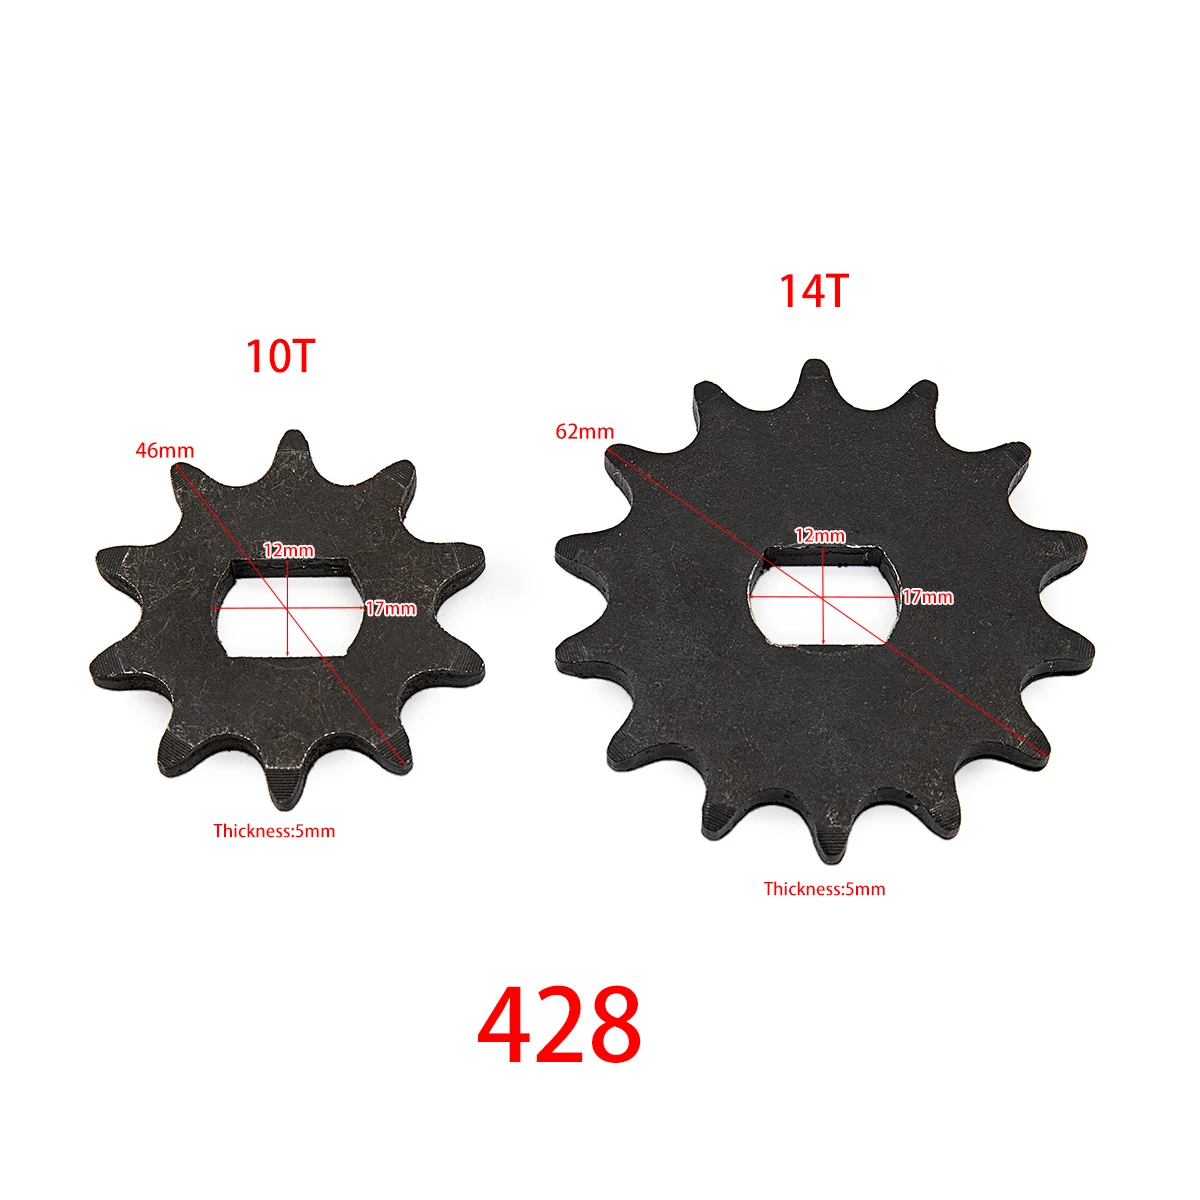 

1Pcs 428 10T/14T Motorcycle Engine Small Sprocket Transmission Chain Wheel Tooth 12x17mm Inner Hole Accessories